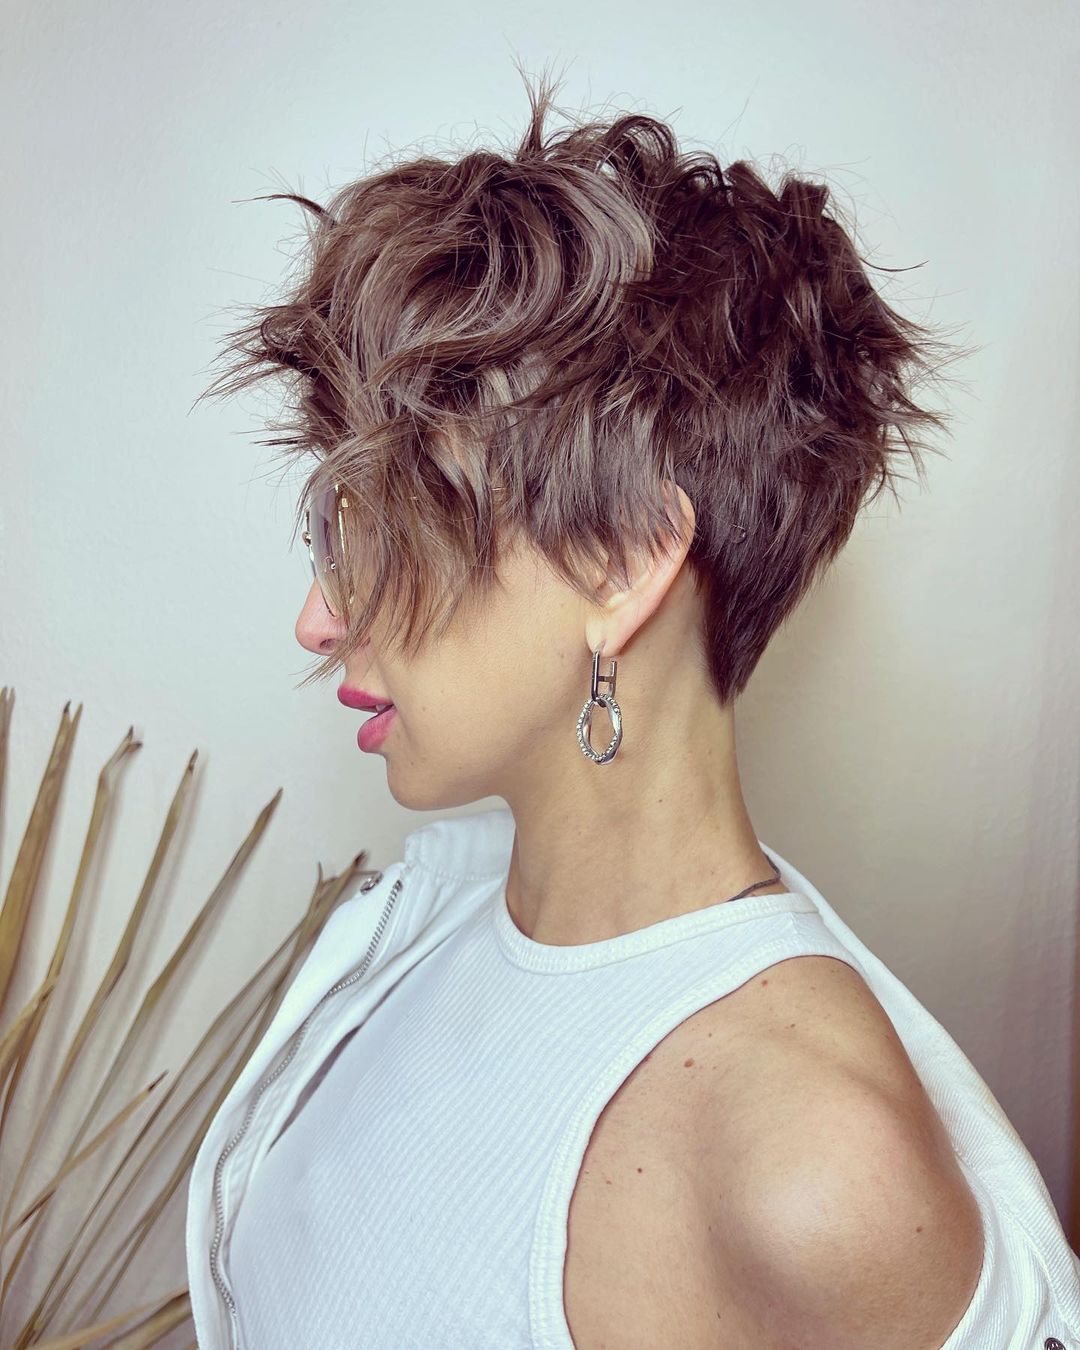 Graduated haircuts for short hair: 15 stylish ideas that will refresh your look